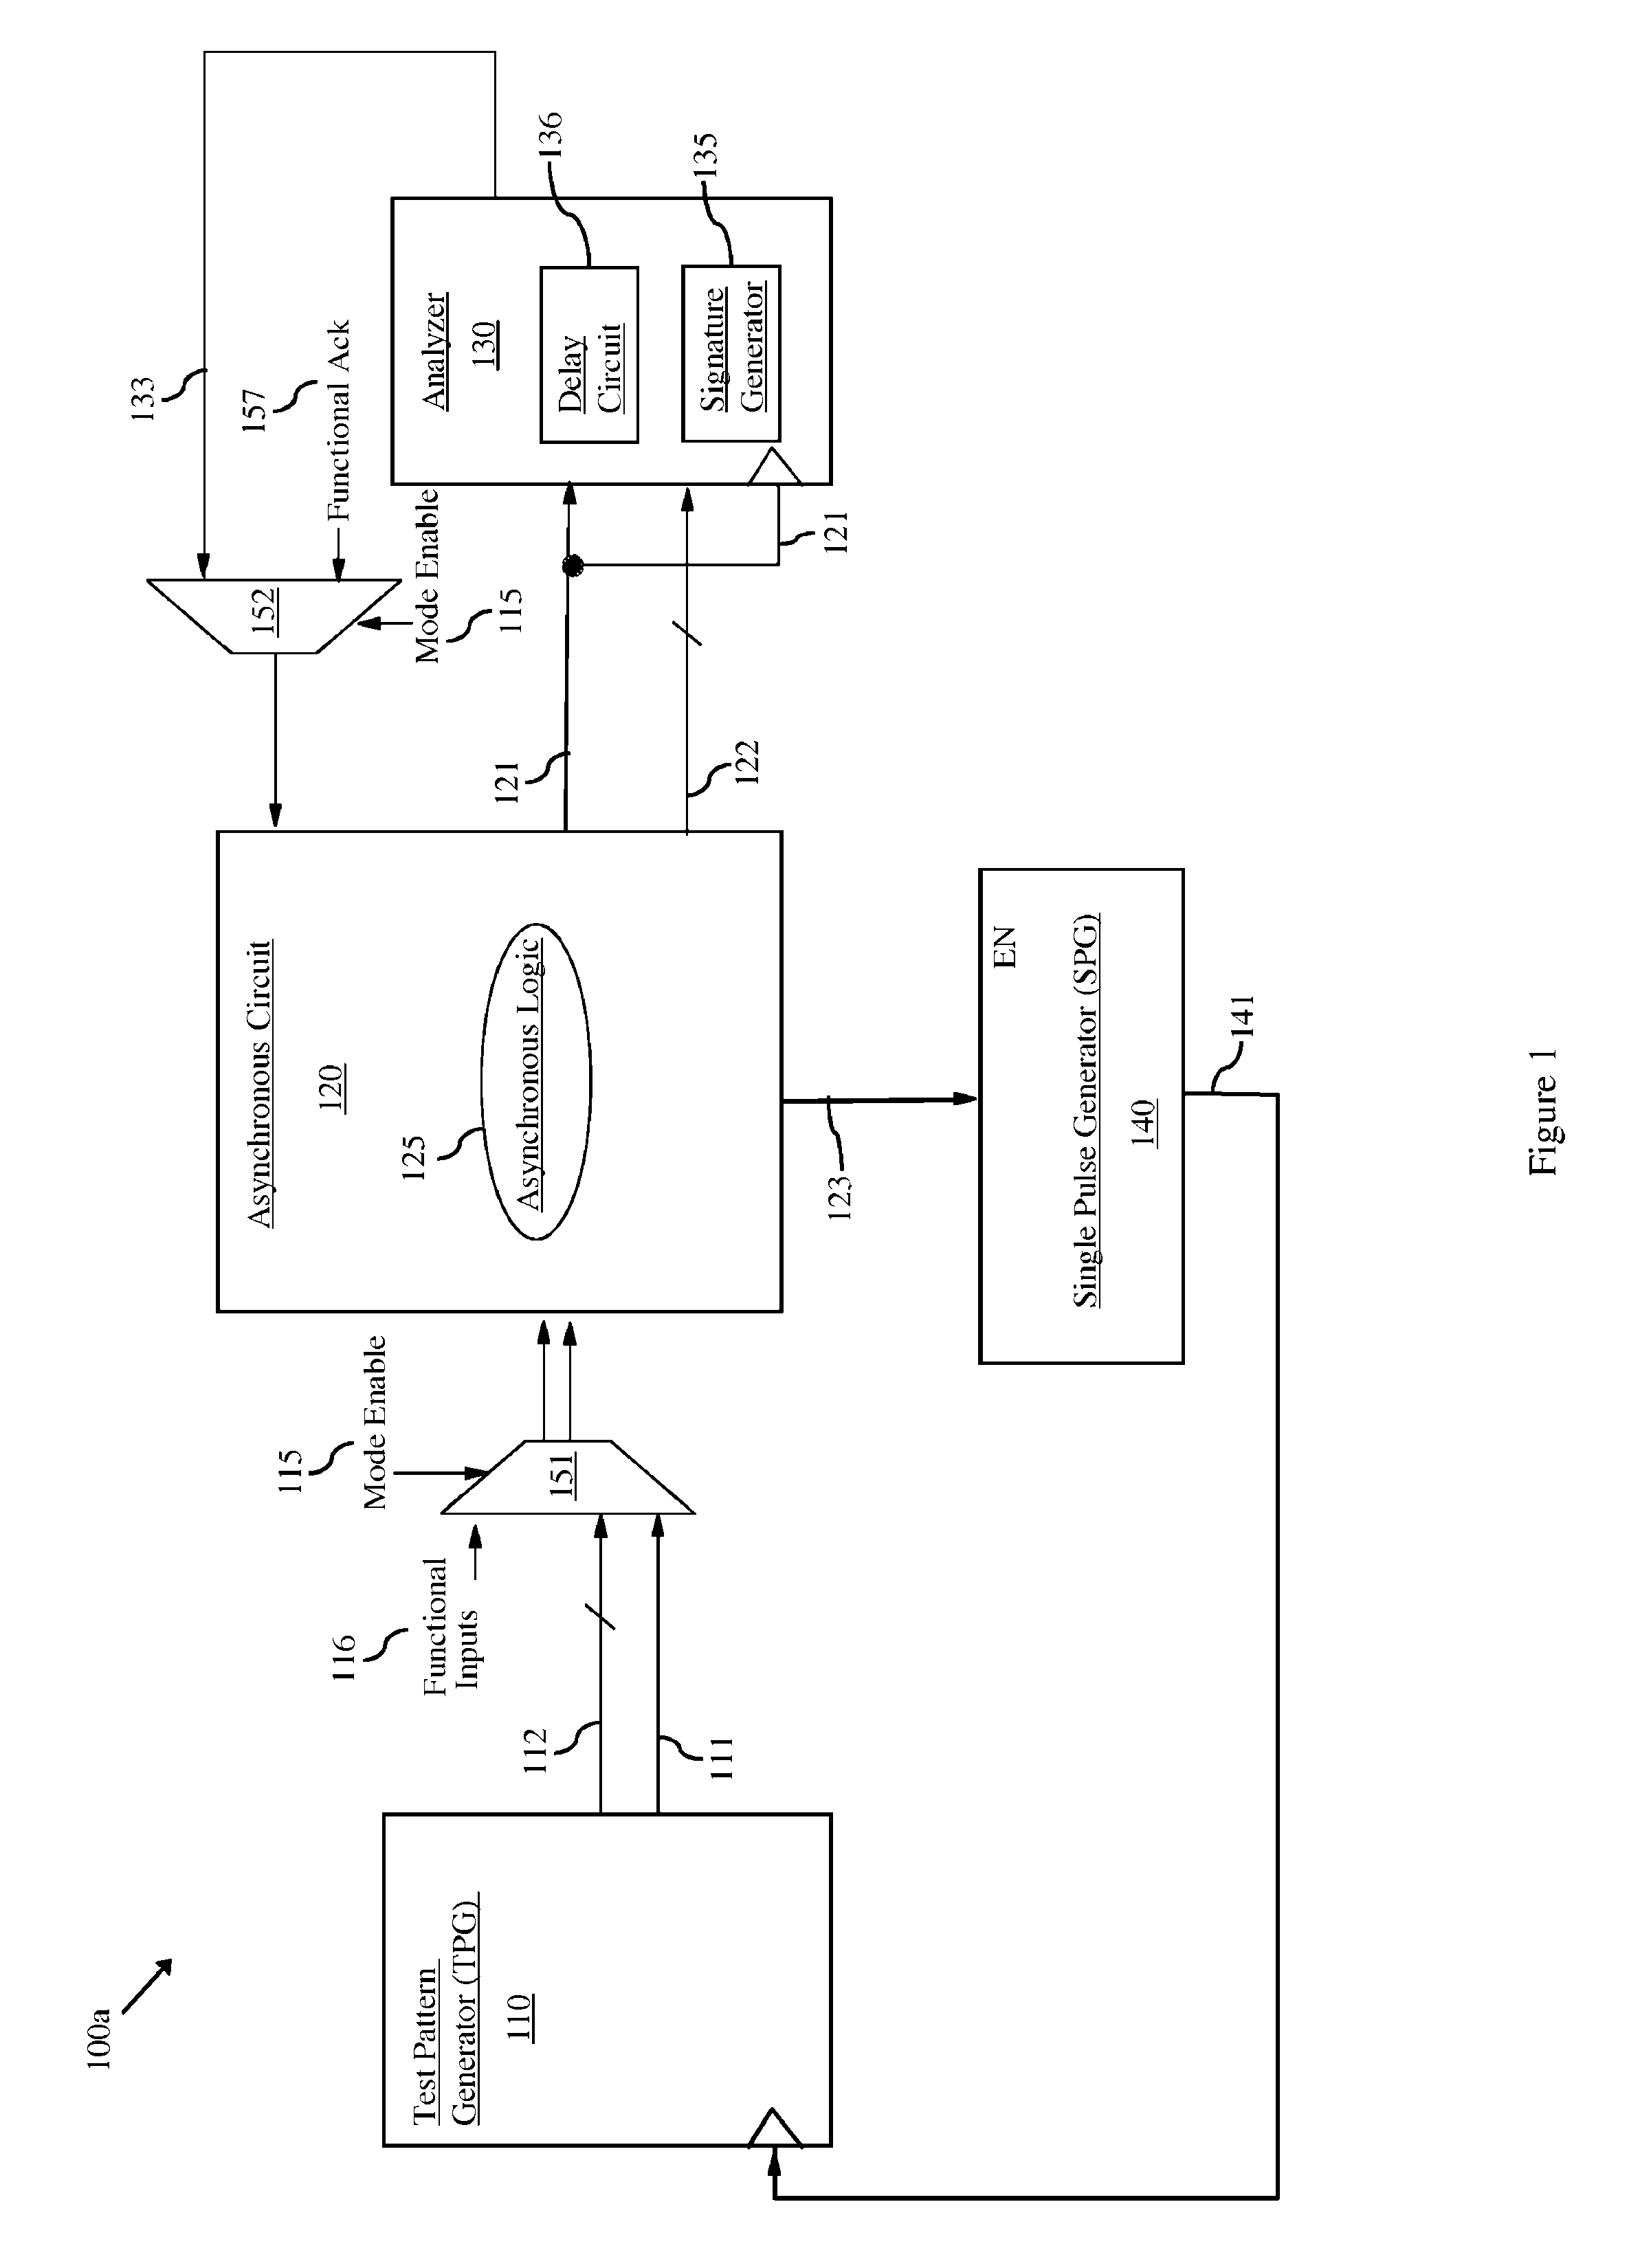 Asynchronous circuit with an at-speed built-in self-test (BIST) architecture